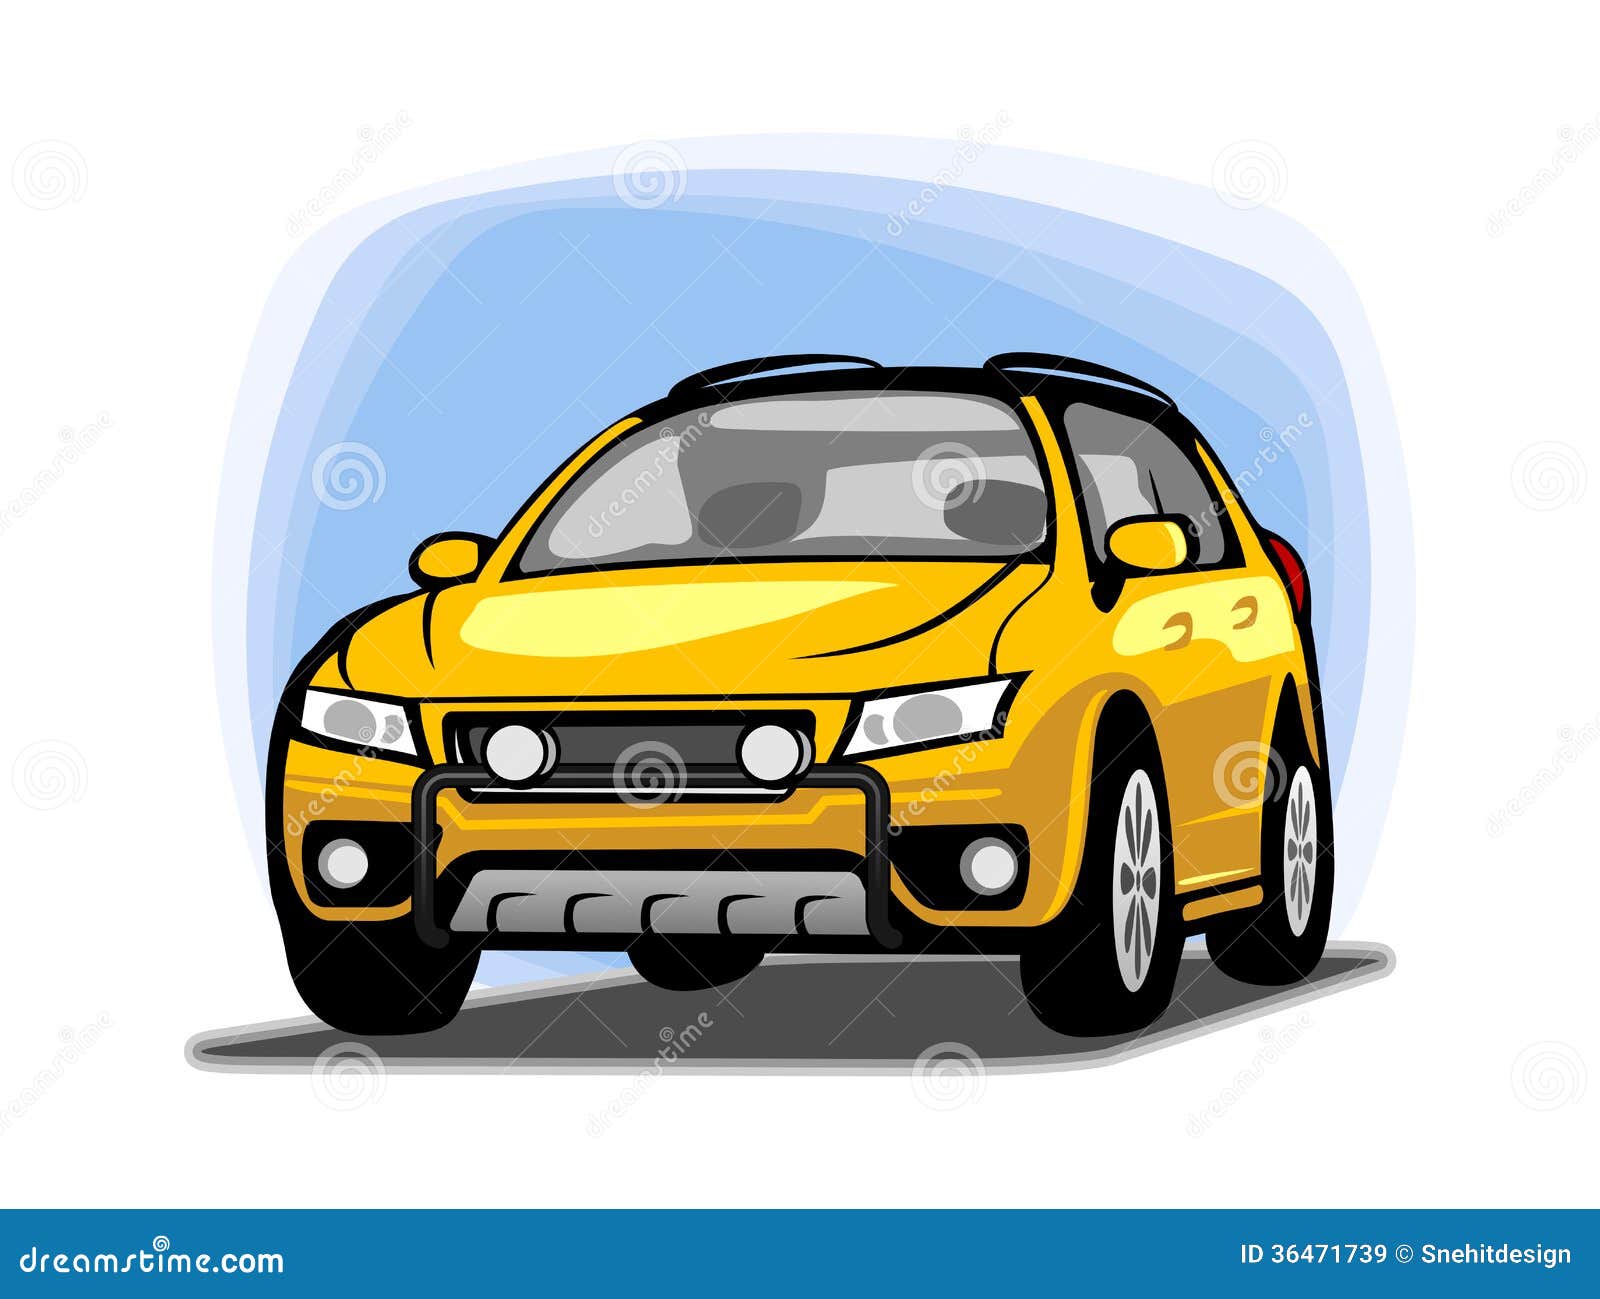 mr clipart vehicle download - photo #40